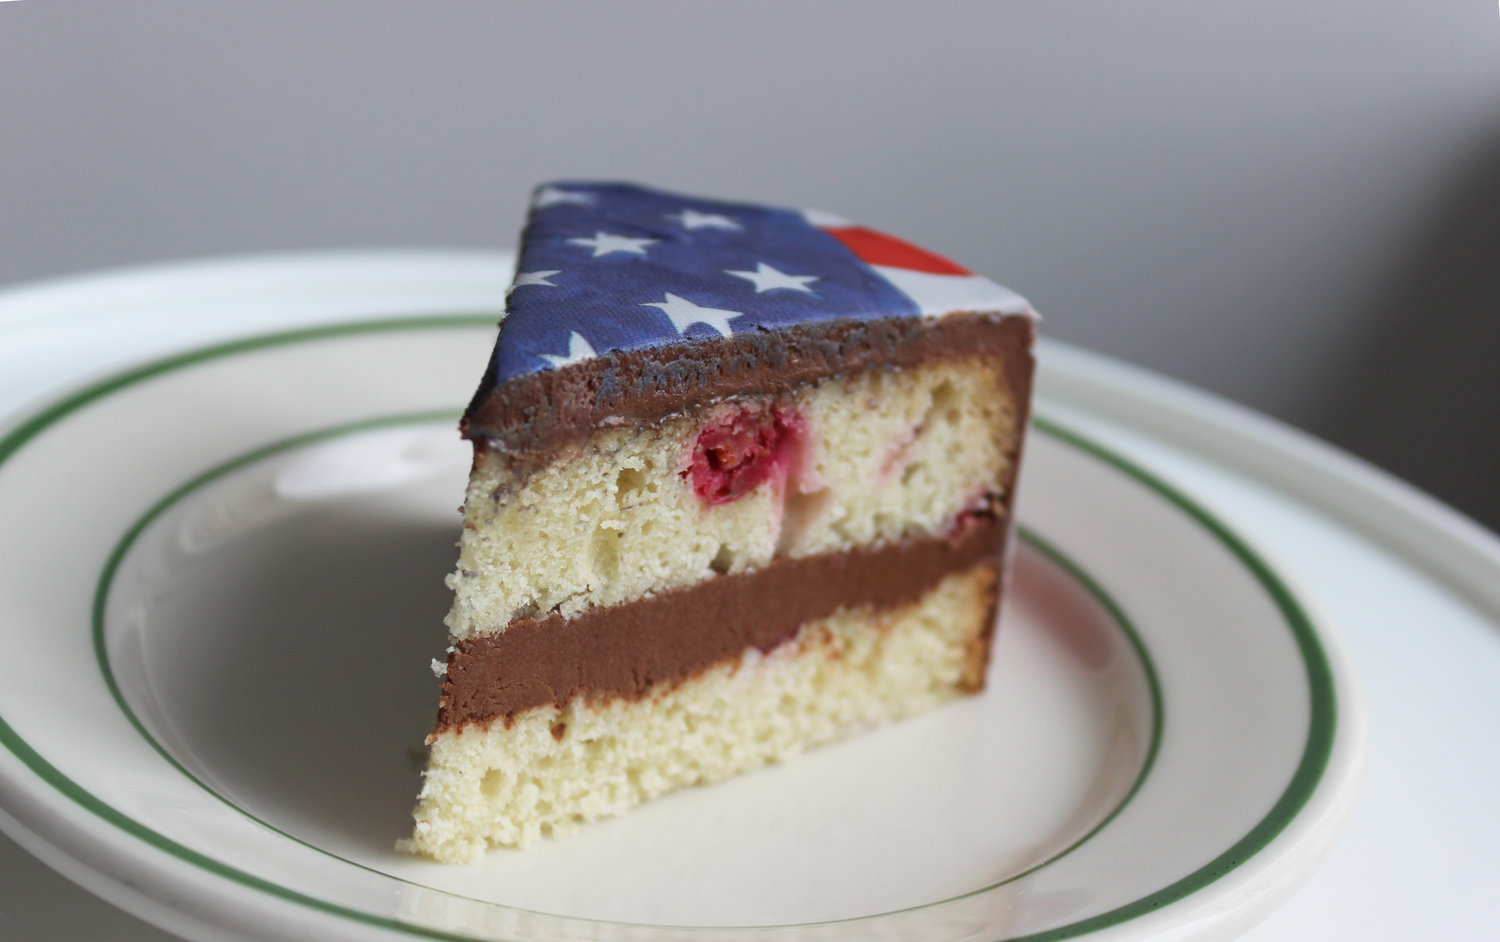 Cranberry Cake with Chocolate Frosting and Flag #ChefanieSheet